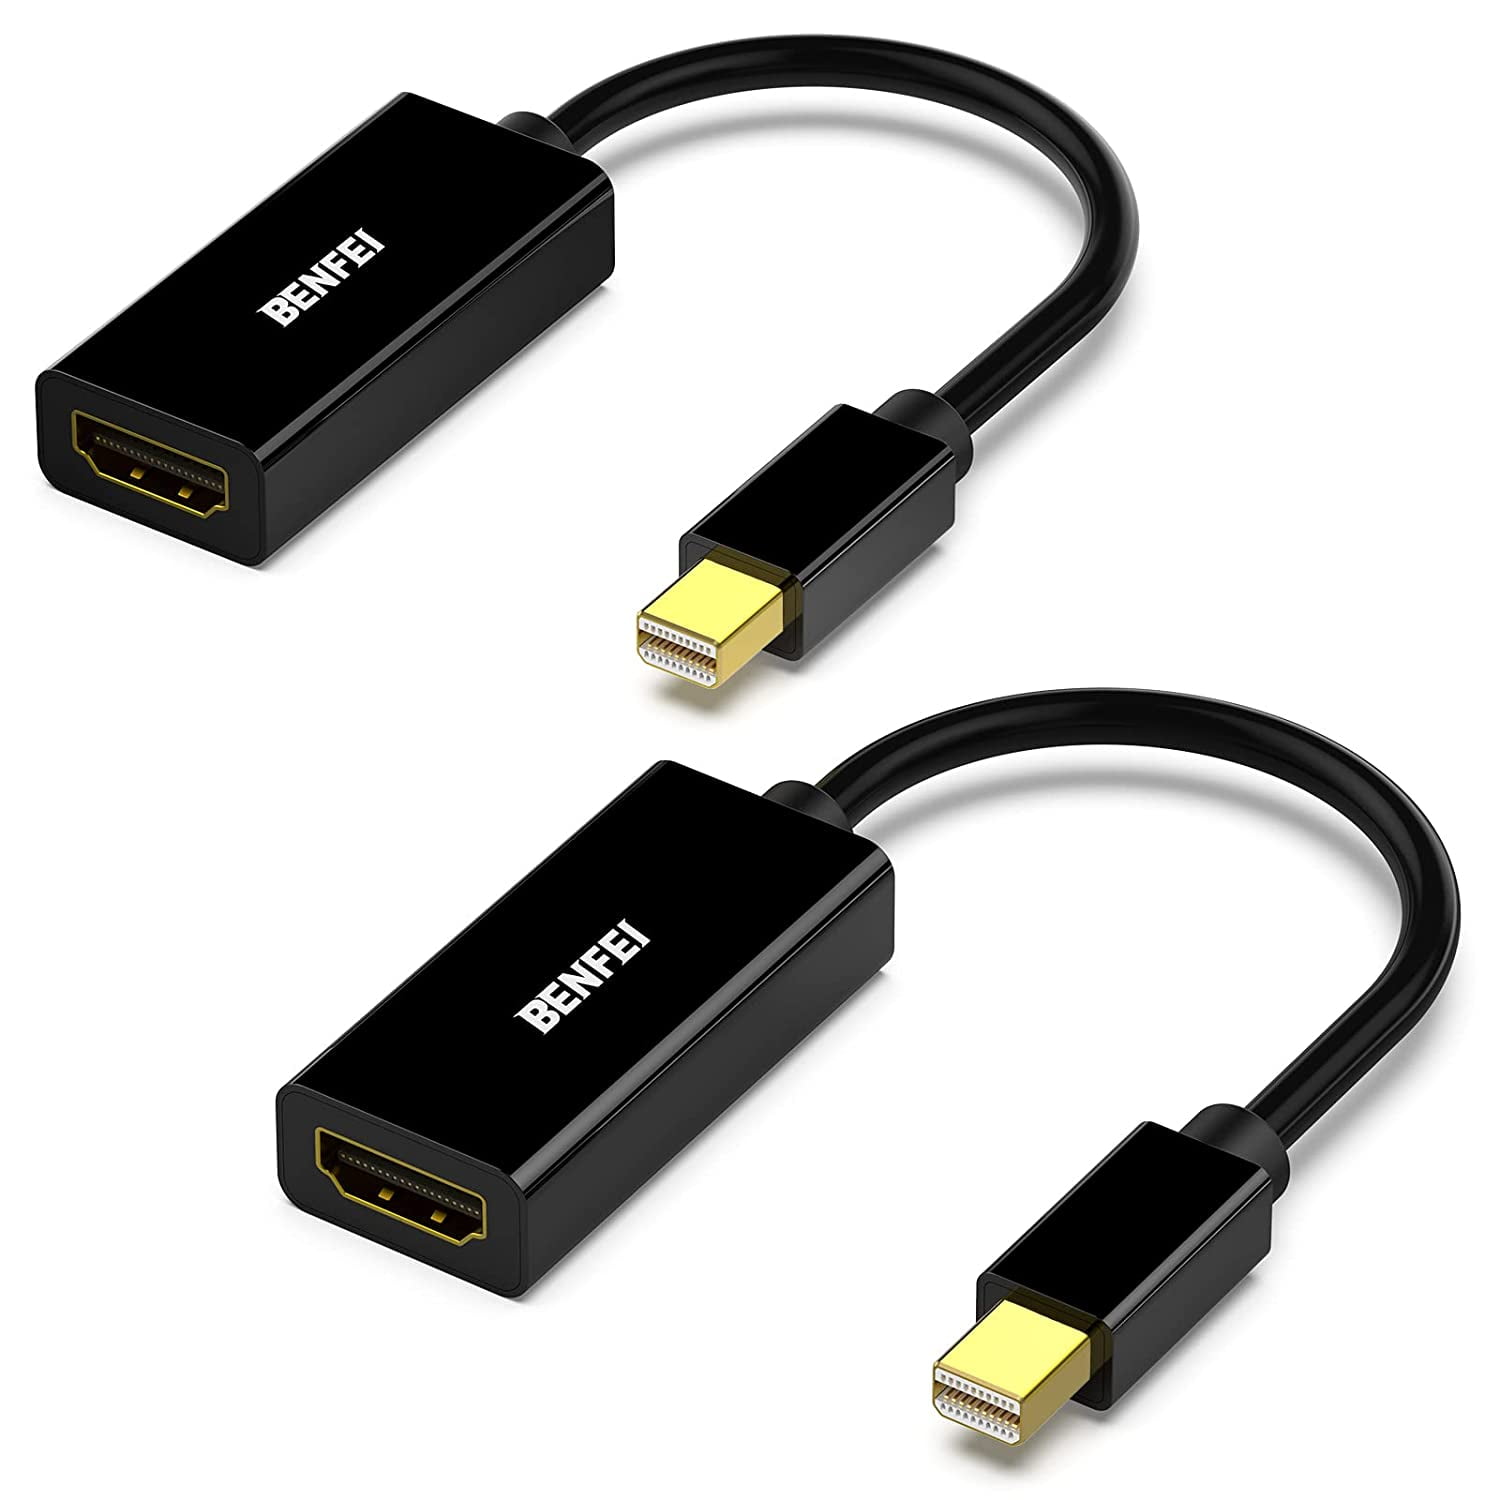 Mini to HDMI Adapter 2 Pack, Benfei Mini DP(Thunderbolt) HDMI Converter Gold-Plated Cord Compatible | Walmart Canada